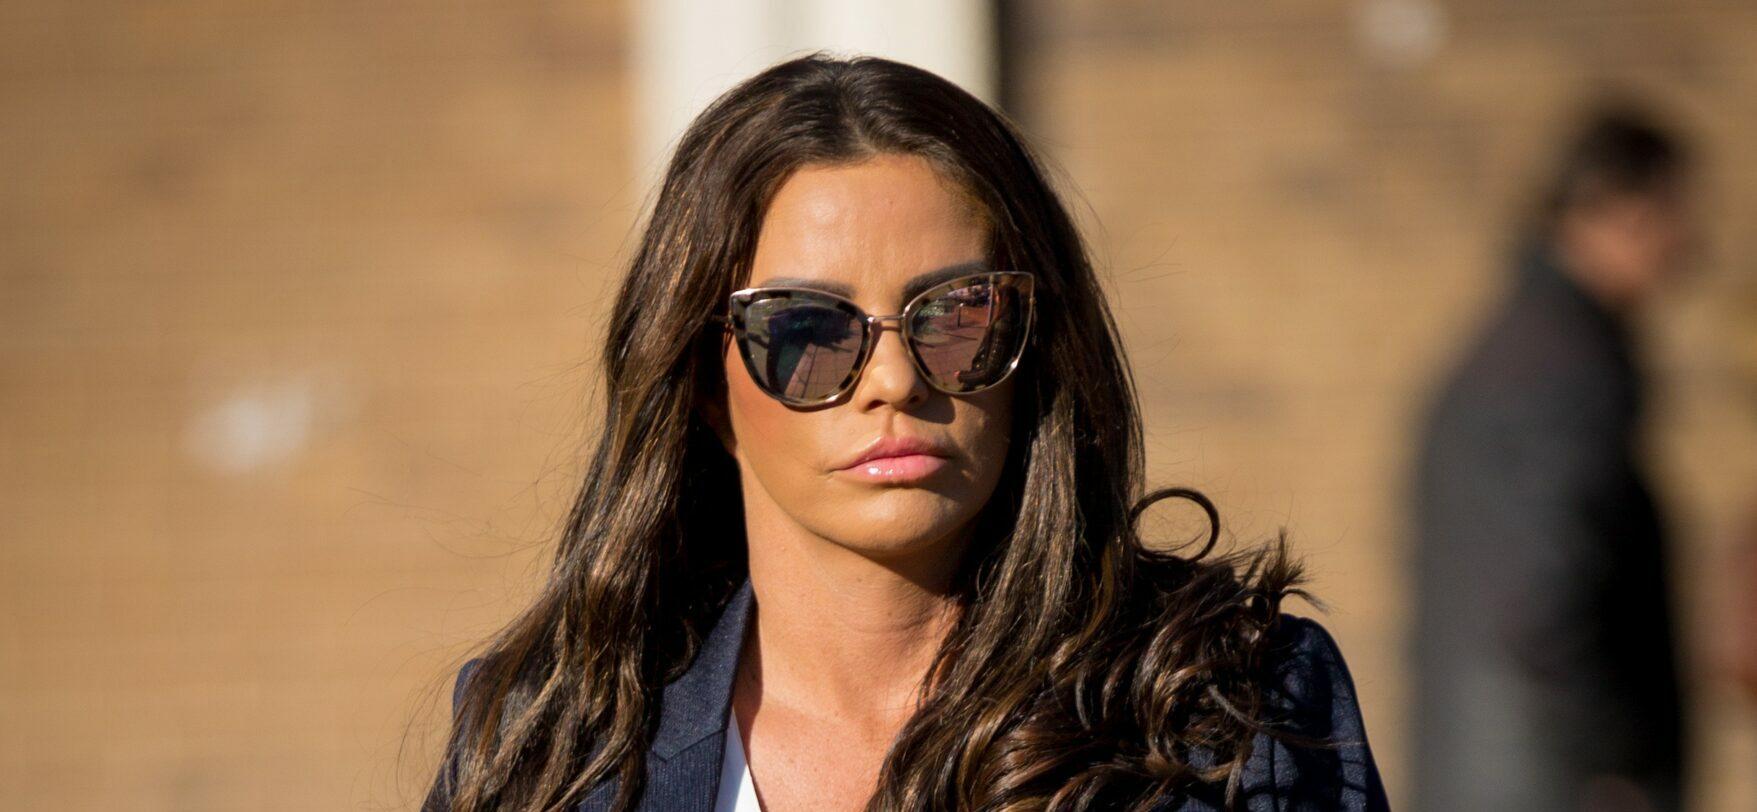 Katie Price Ventures Into OnlyFans With Raunchy Video!